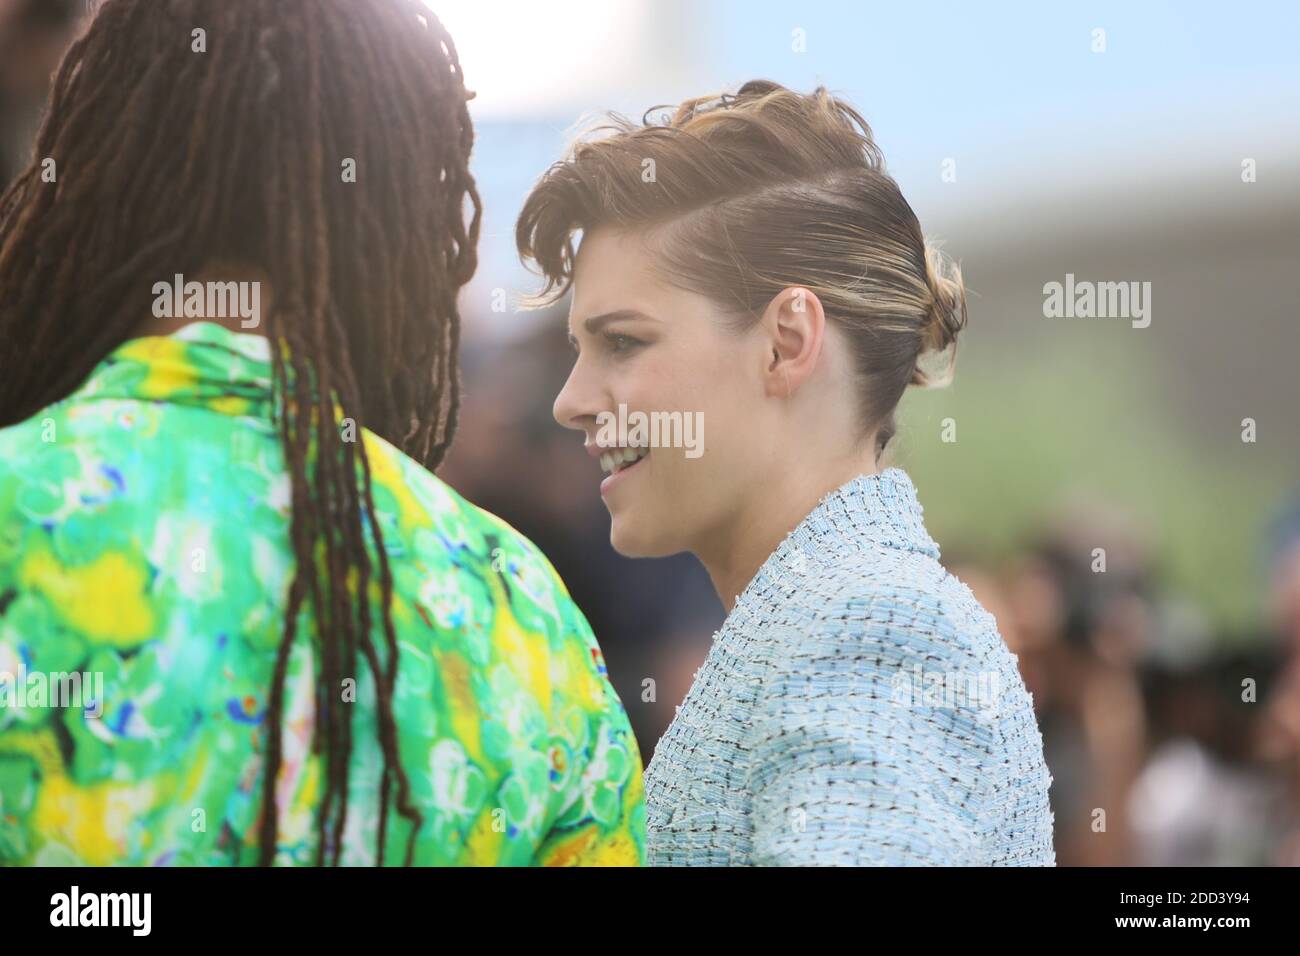 Jury members Kristen Stewart attends the Jury photocall during the